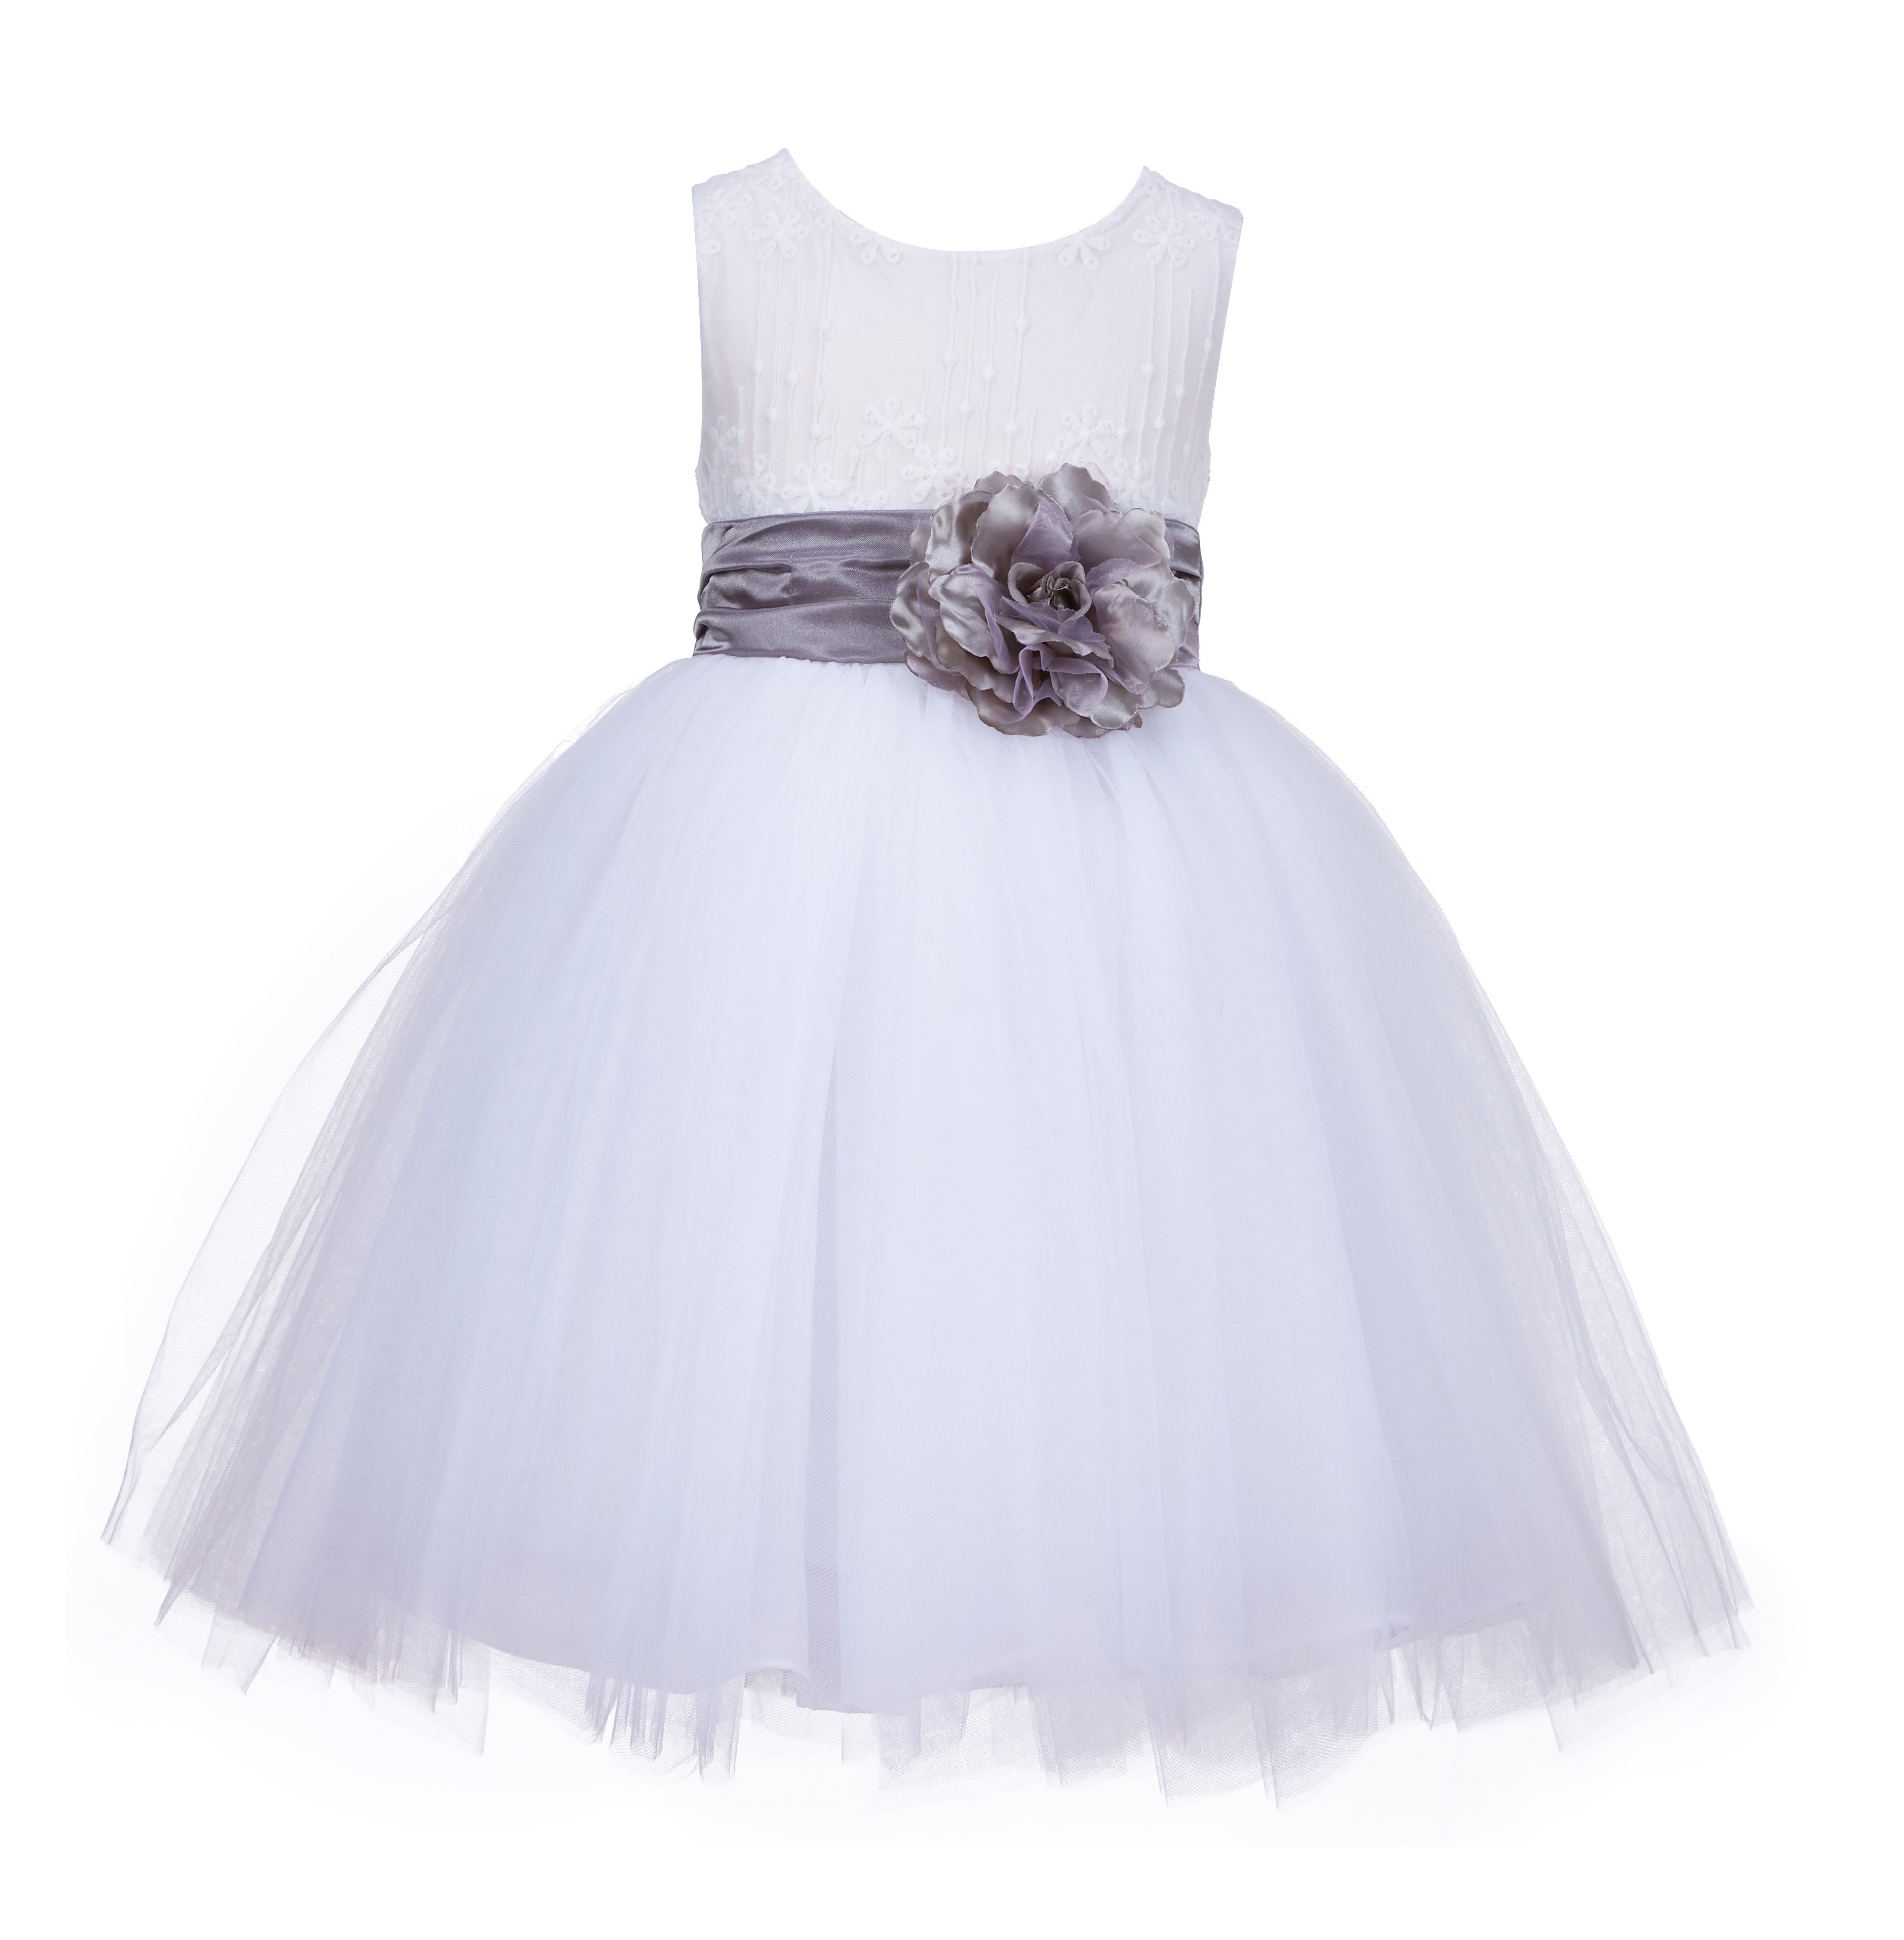 White/Mercury Lace Embroidery Tulle Flower Girl Dress Wedding 118